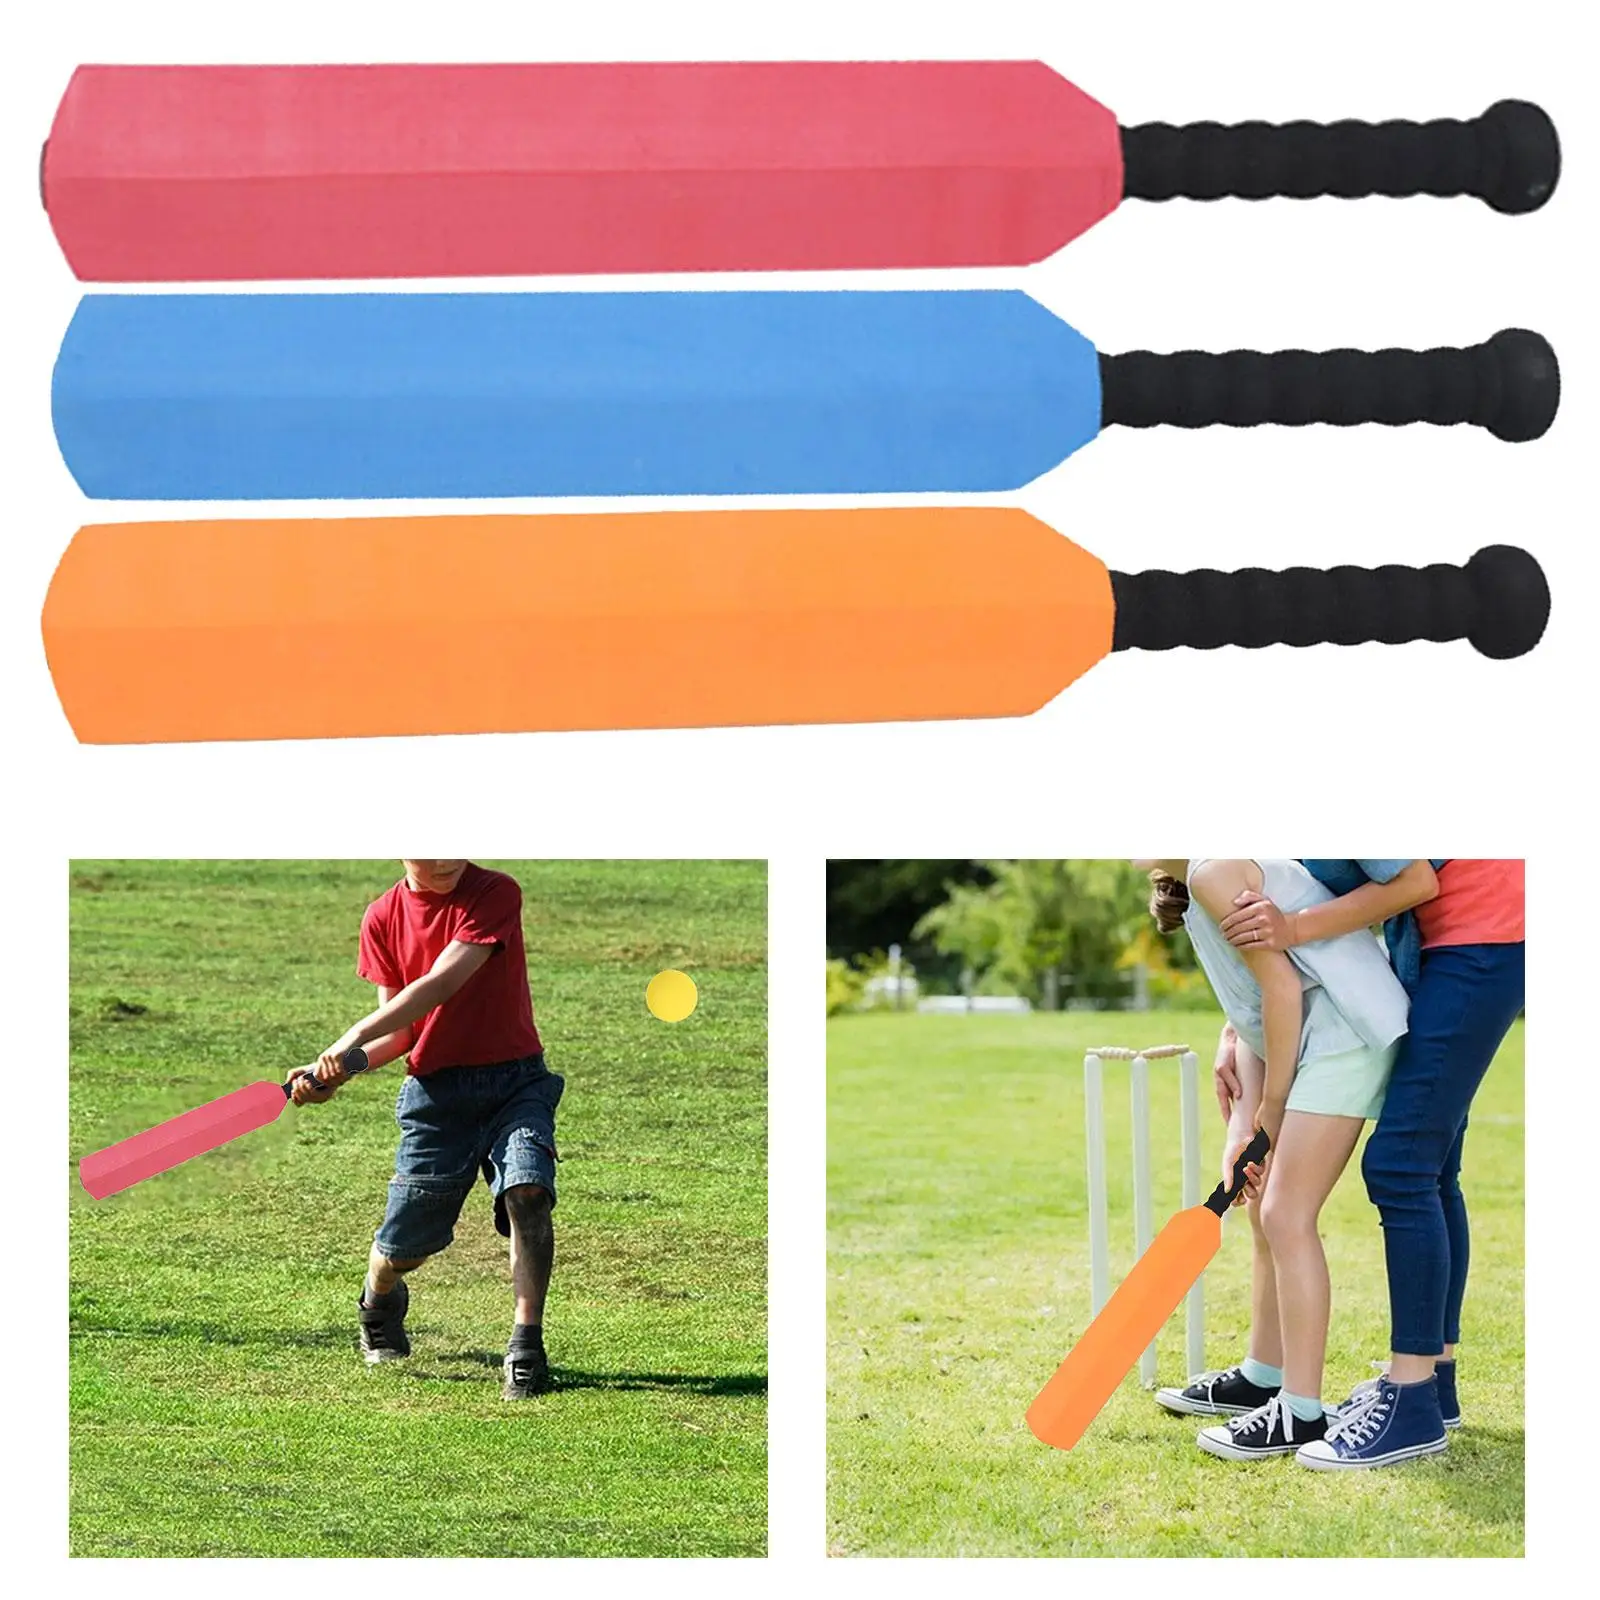 Cricket, Sport Toy, Set, Professional Training Aid, Game, for Indoor, Outside Play, Kids, Interactive Toys